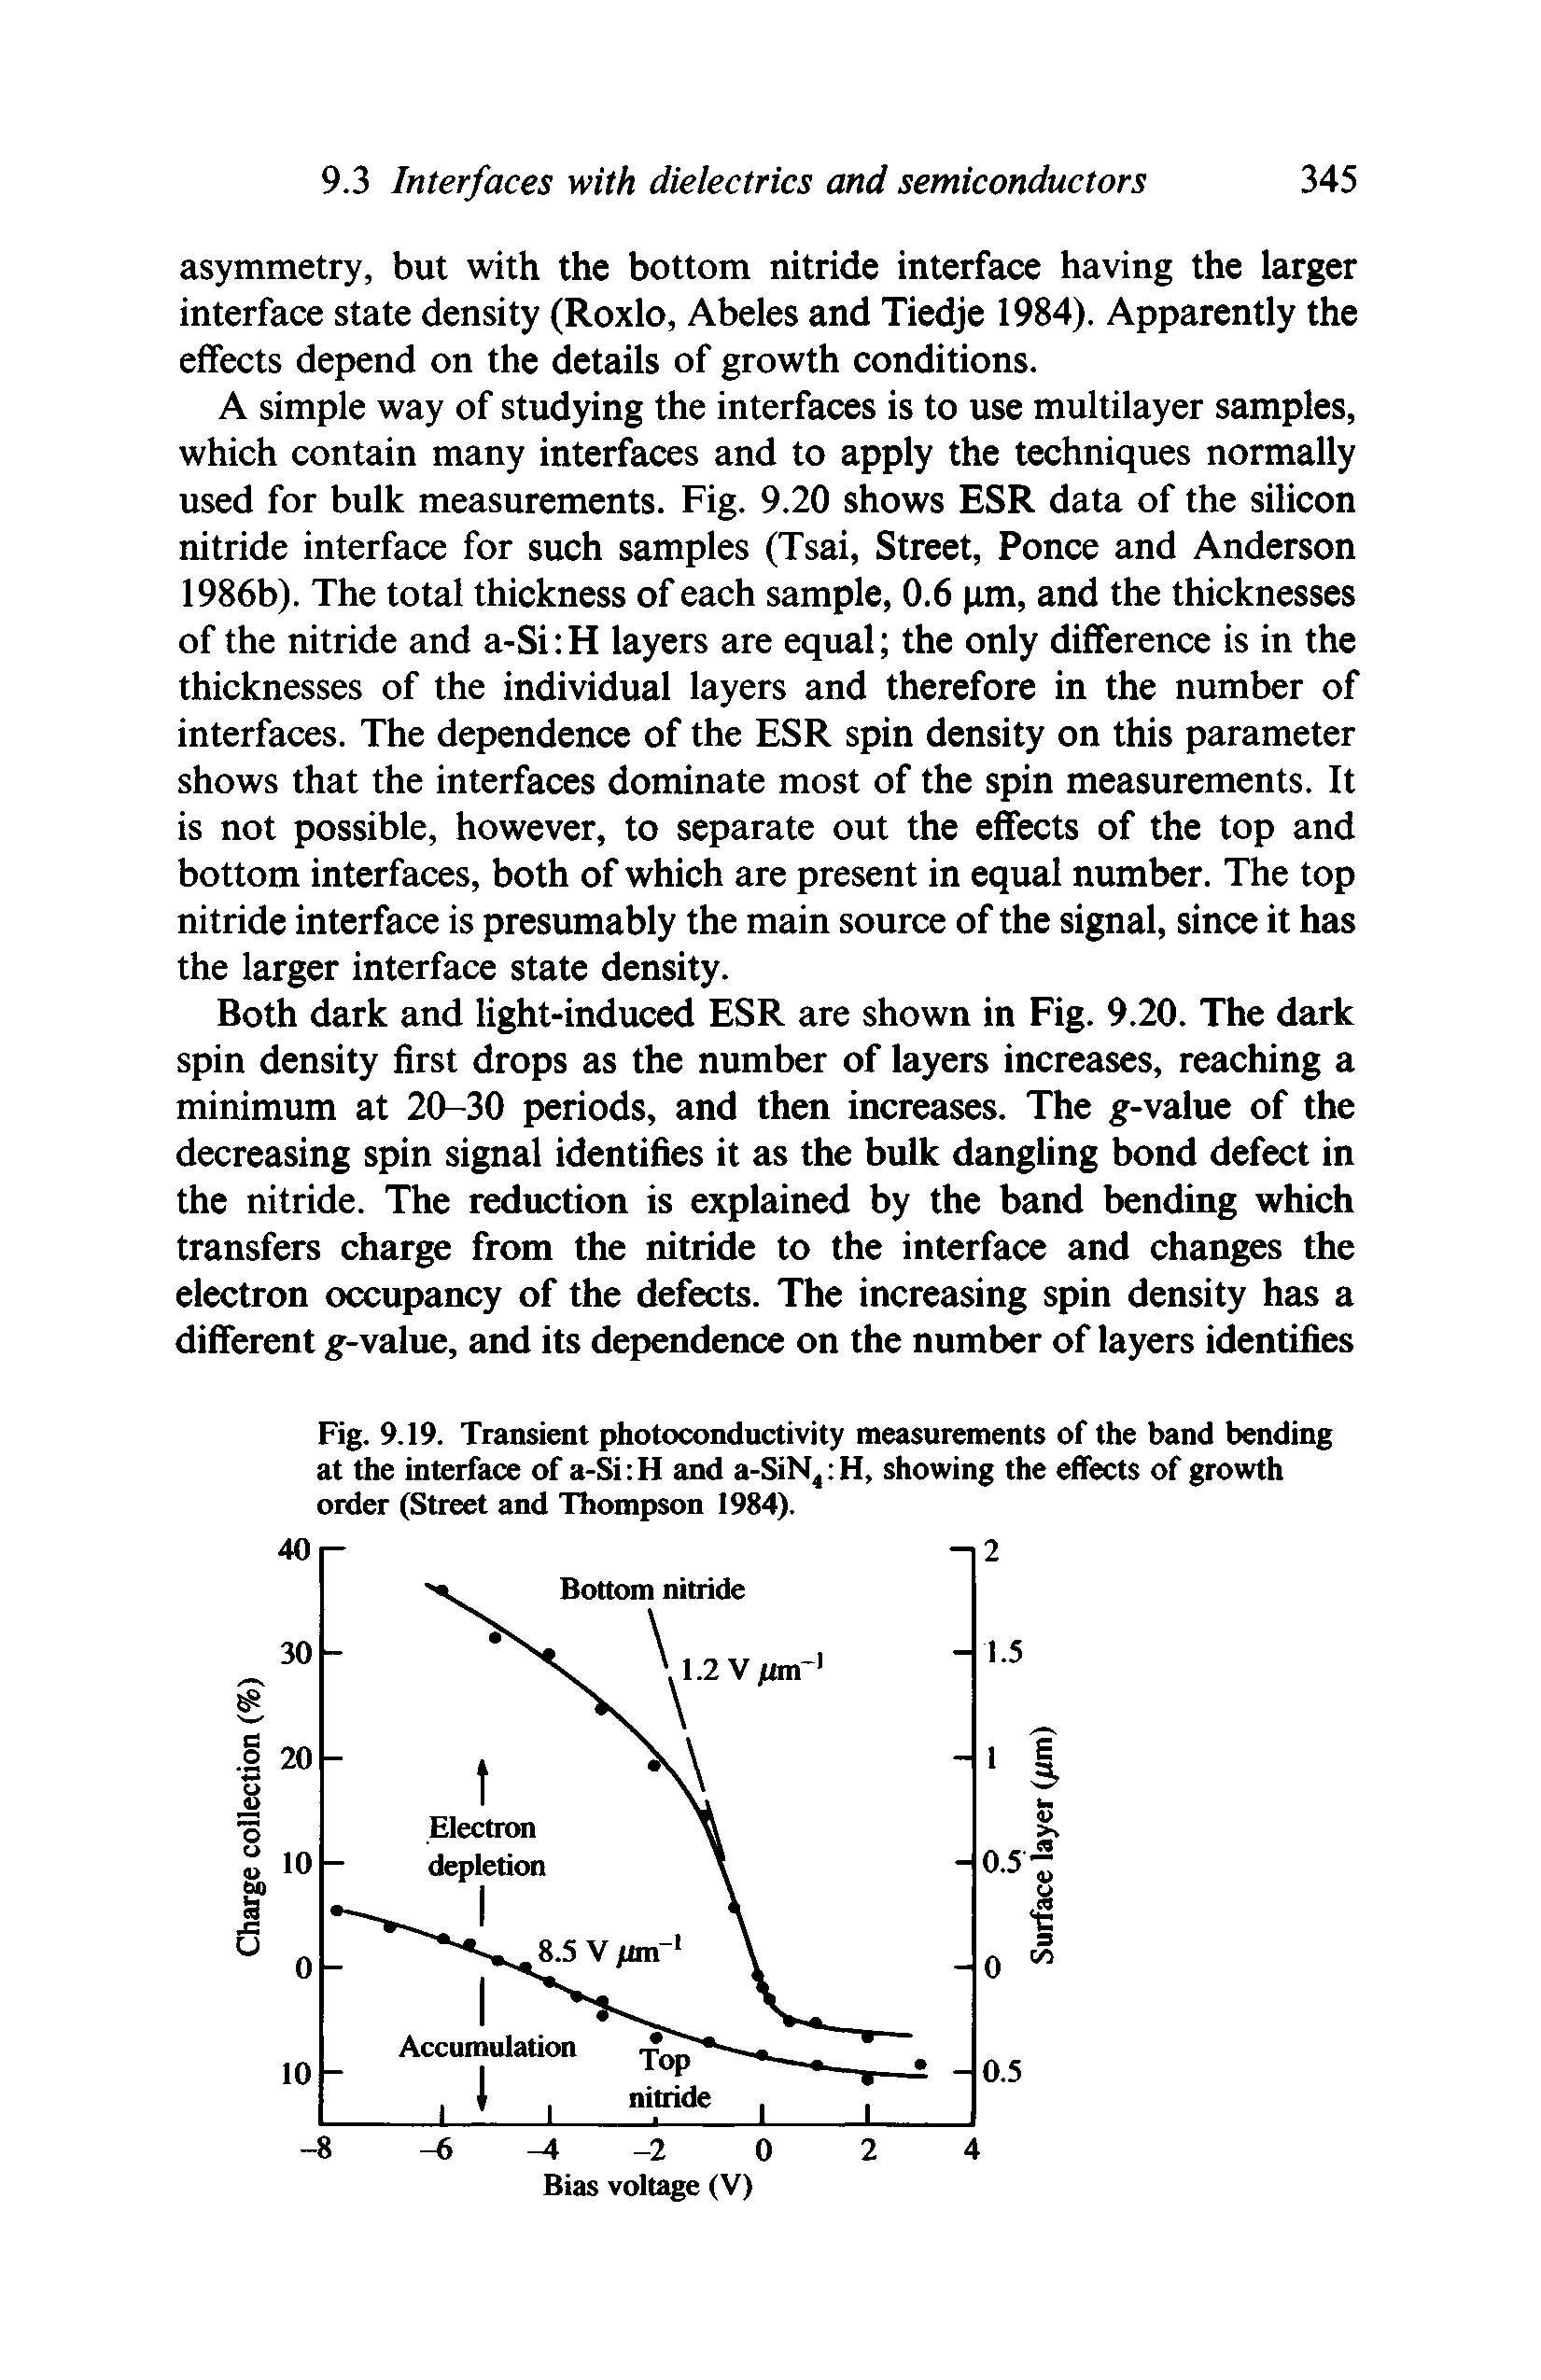 Fig. 9.19. Transient photoconductivity measurements of the band bending at the interface of a-Si H and a-SiN H, showing the effects of growth order (Street and Thompson 1984).